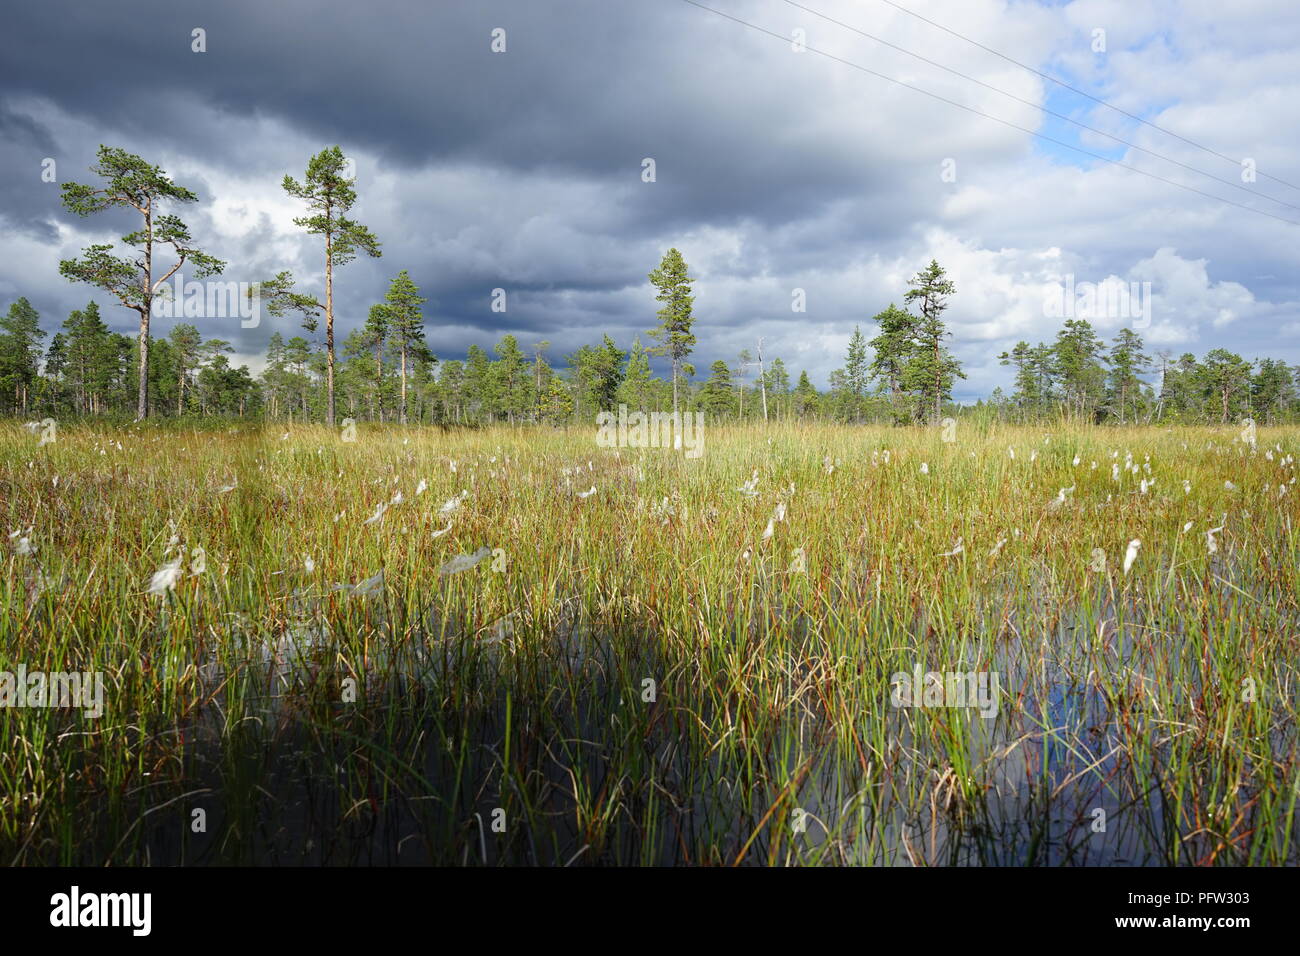 Lake with water plants and trees in the background, Lapland Finland Stock Photo